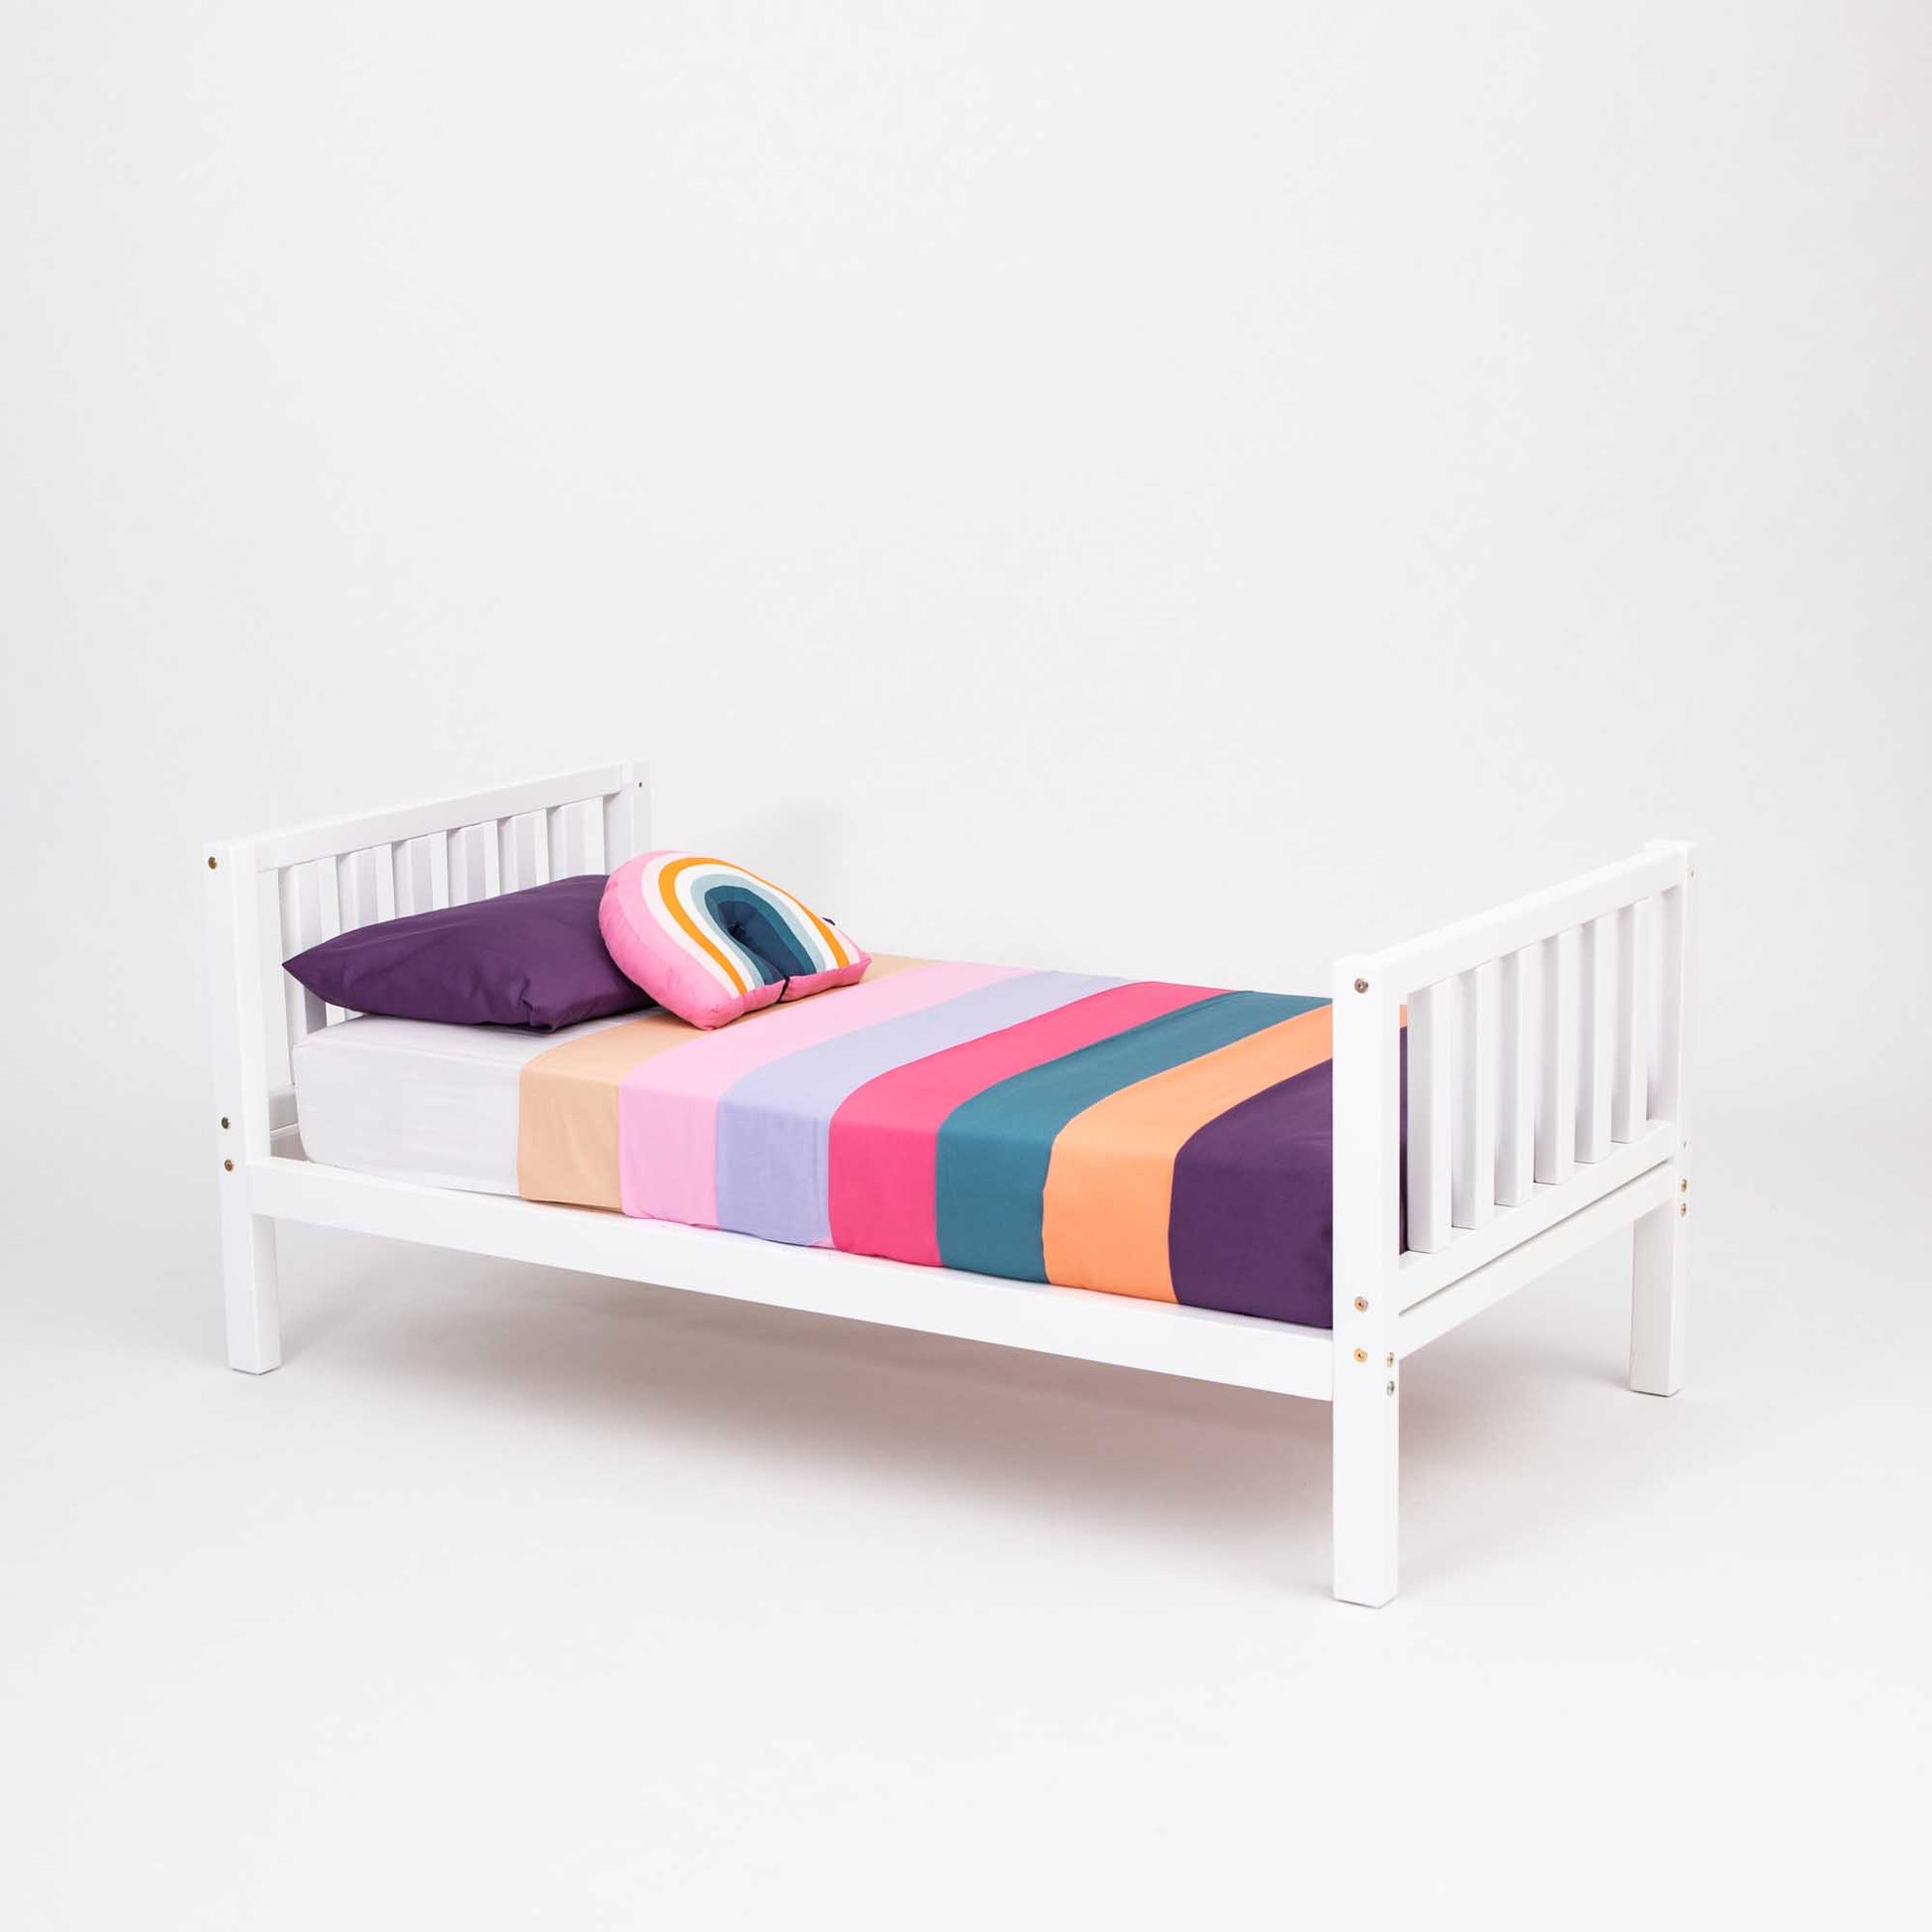 A 2-in-1 kid's bed on legs with a vertical rail headboard and footboard with a colorful striped blanket.